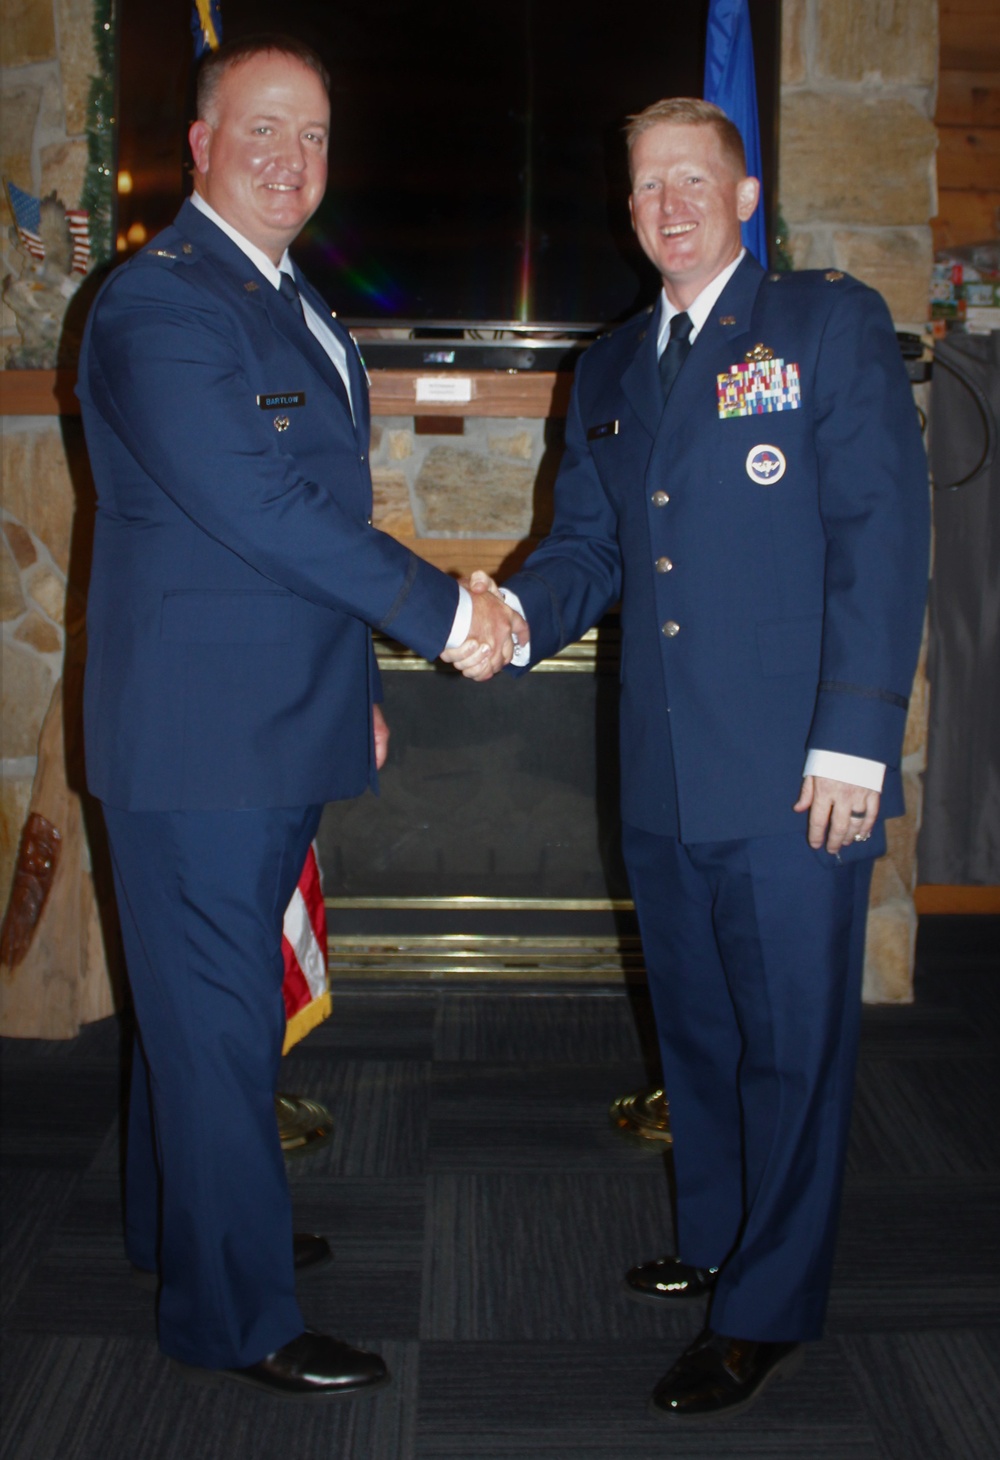 Lt Col Allen D. Lewis becomes new 325th CE Squadron Commander at Tyndall AFB